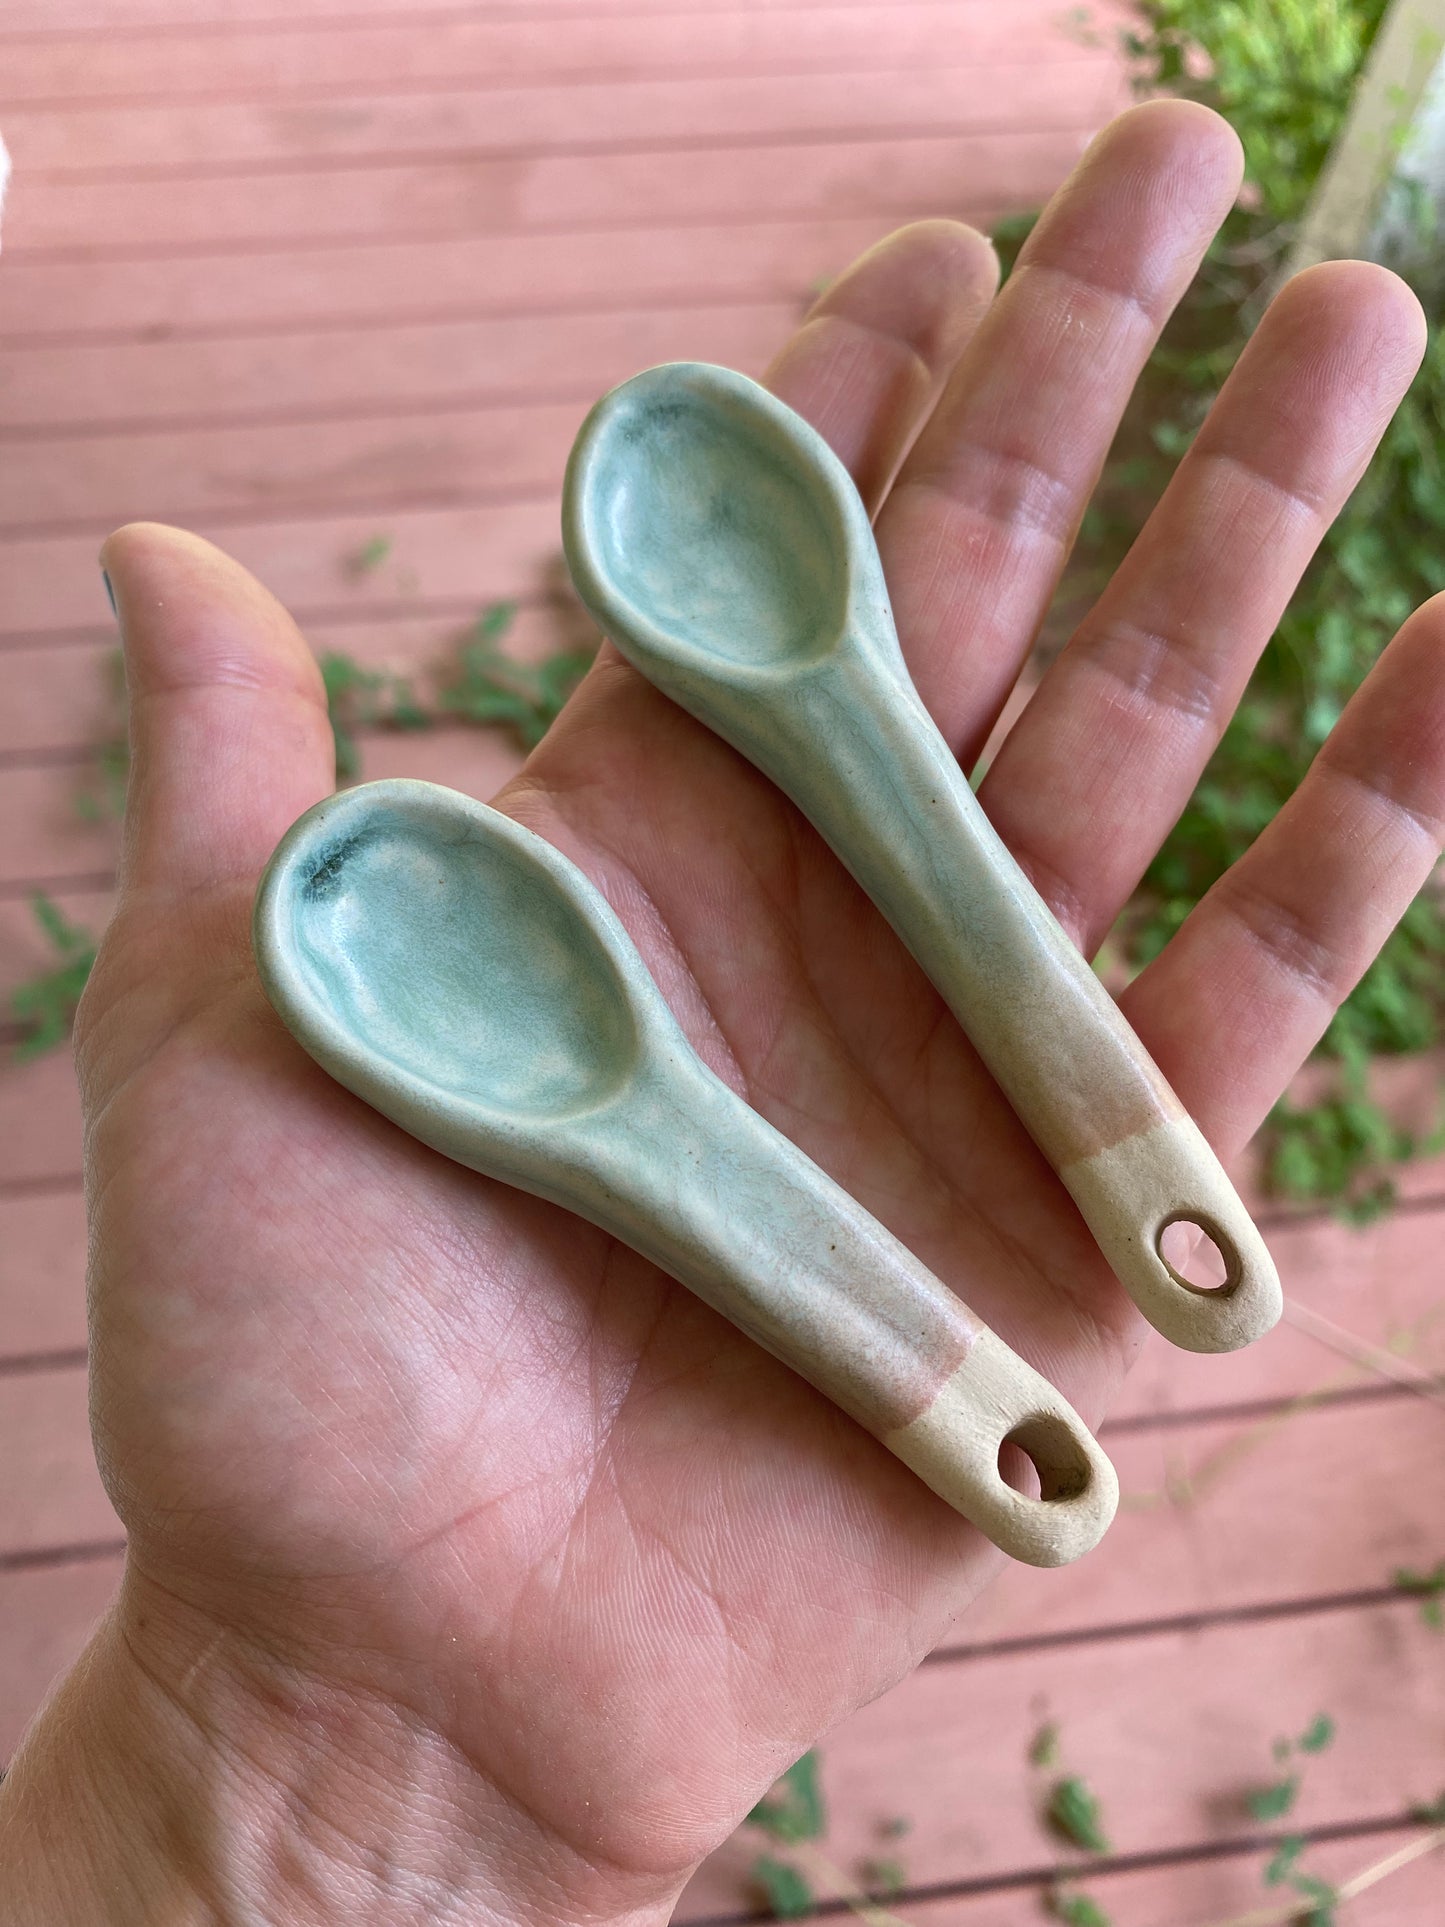 Hand Built Spoons